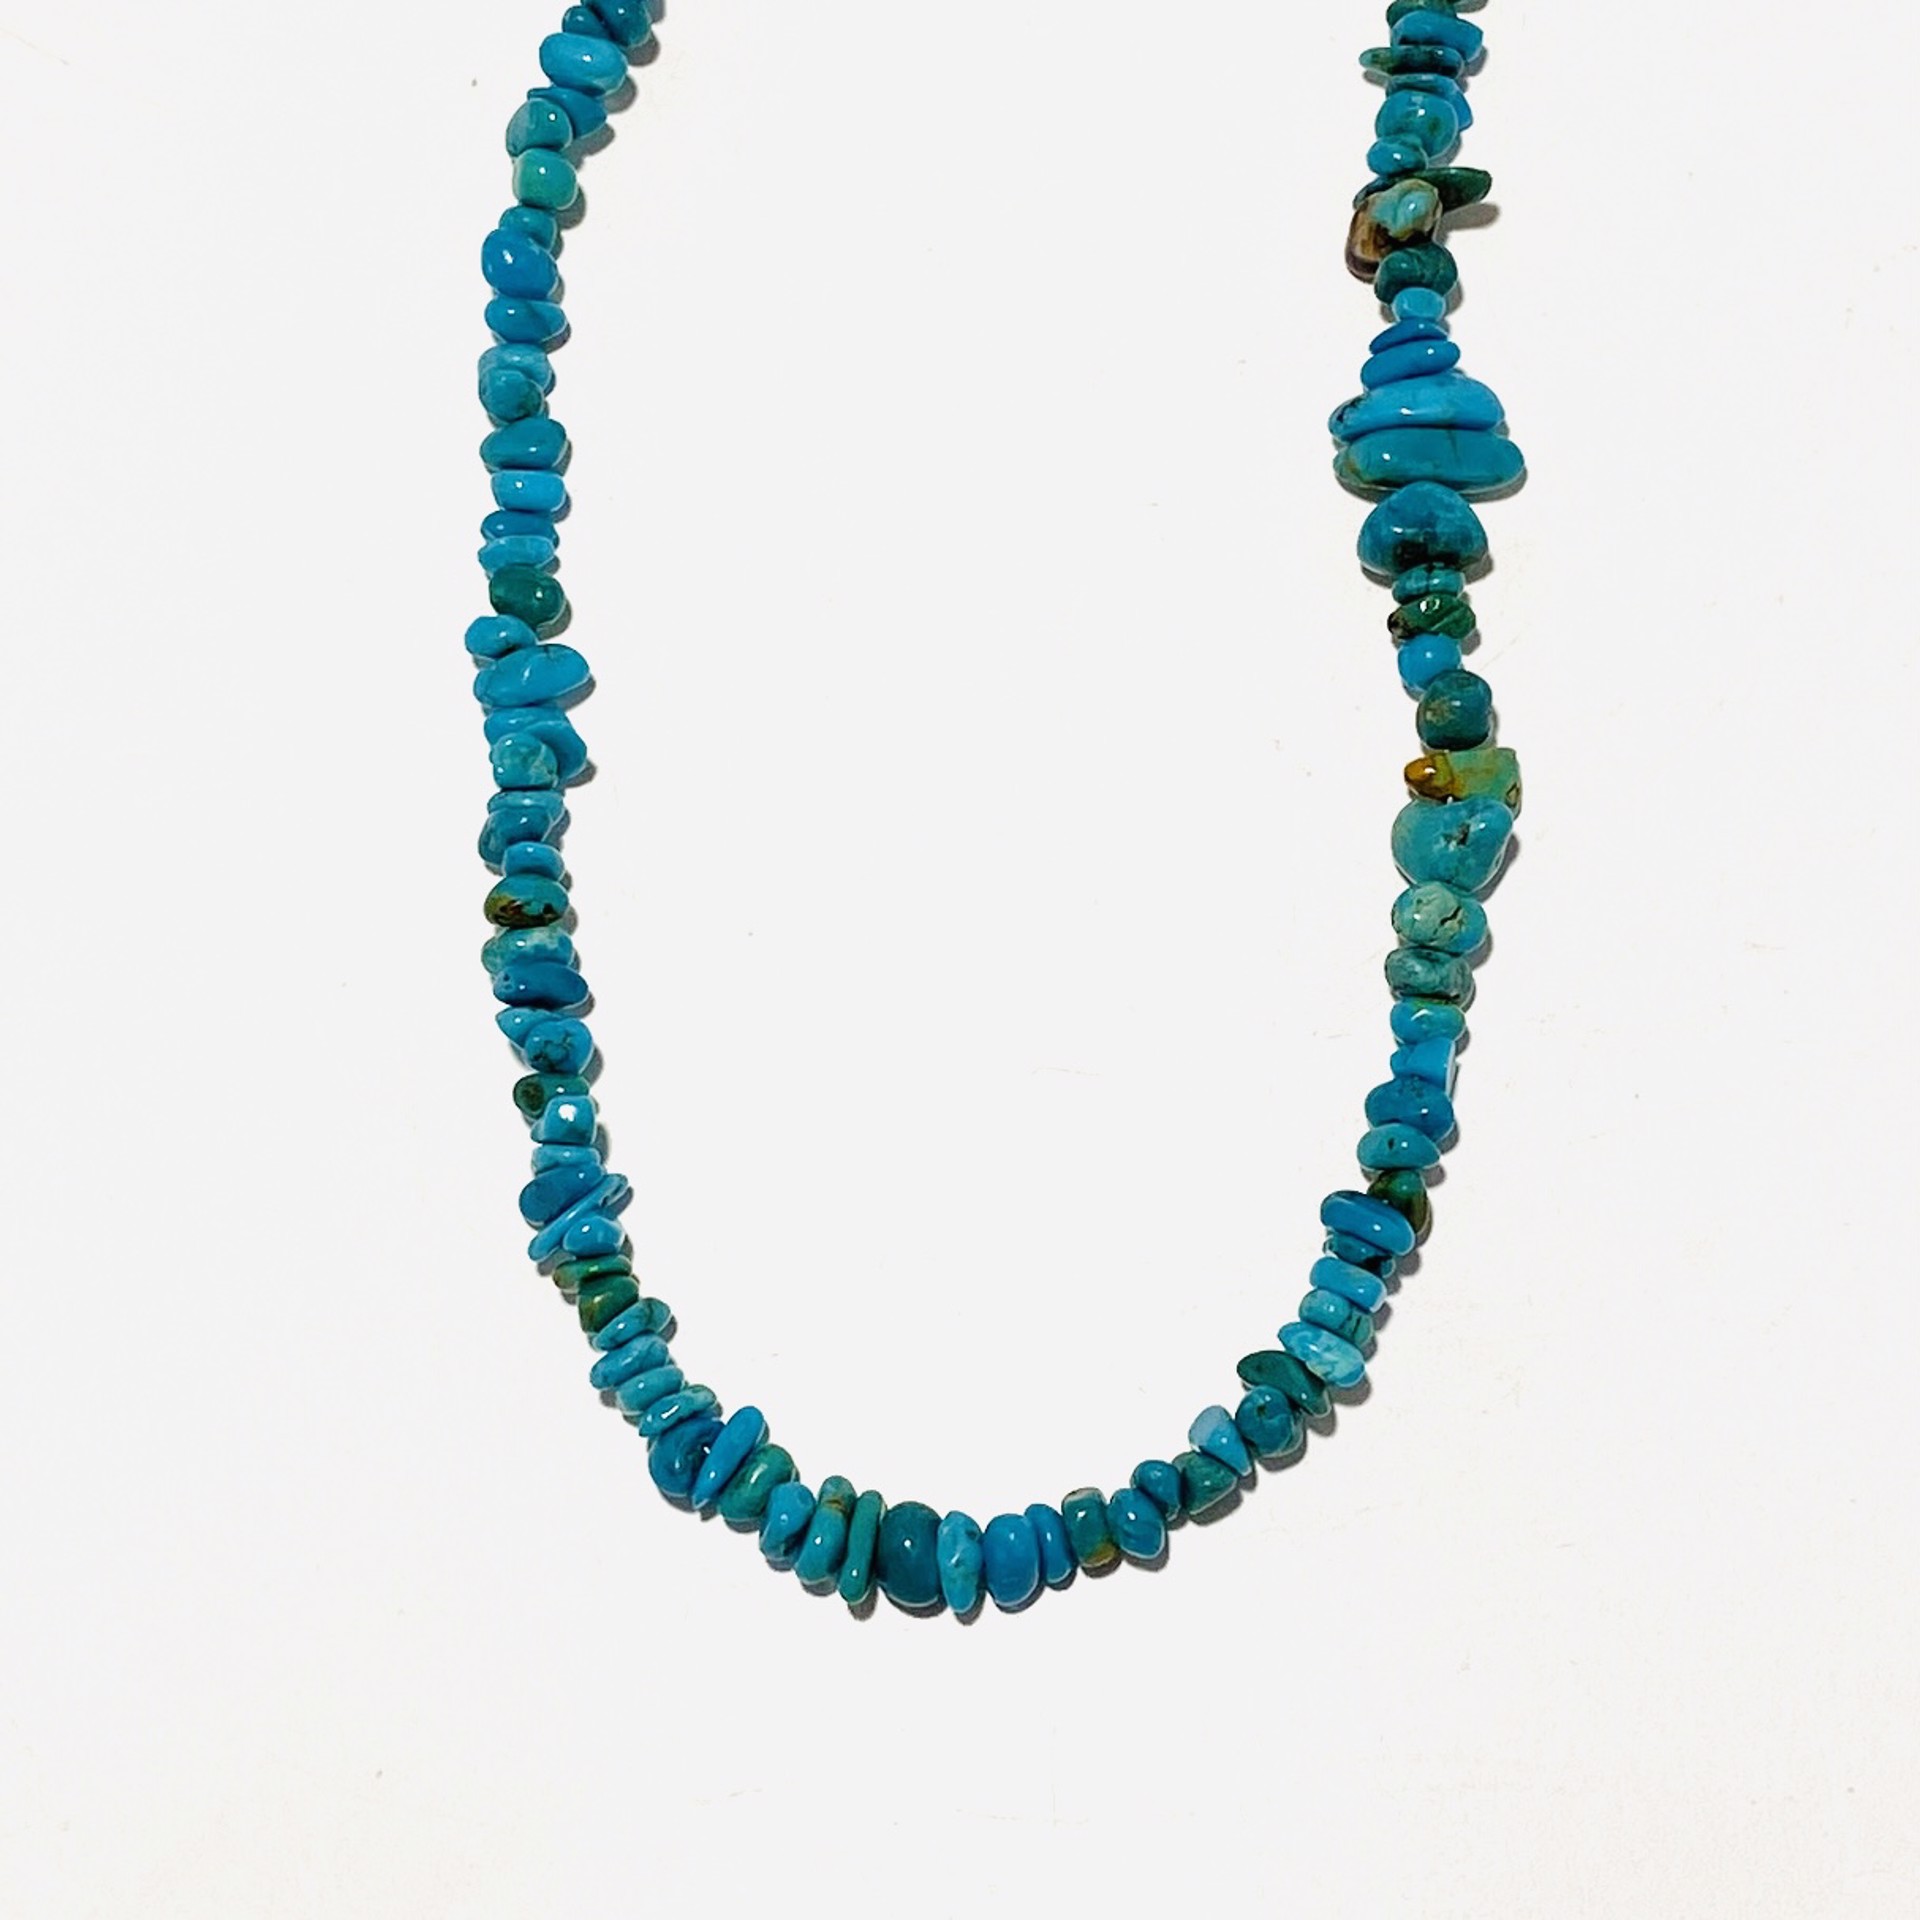 American Turquoise Strand  Necklace by Nance Trueworthy